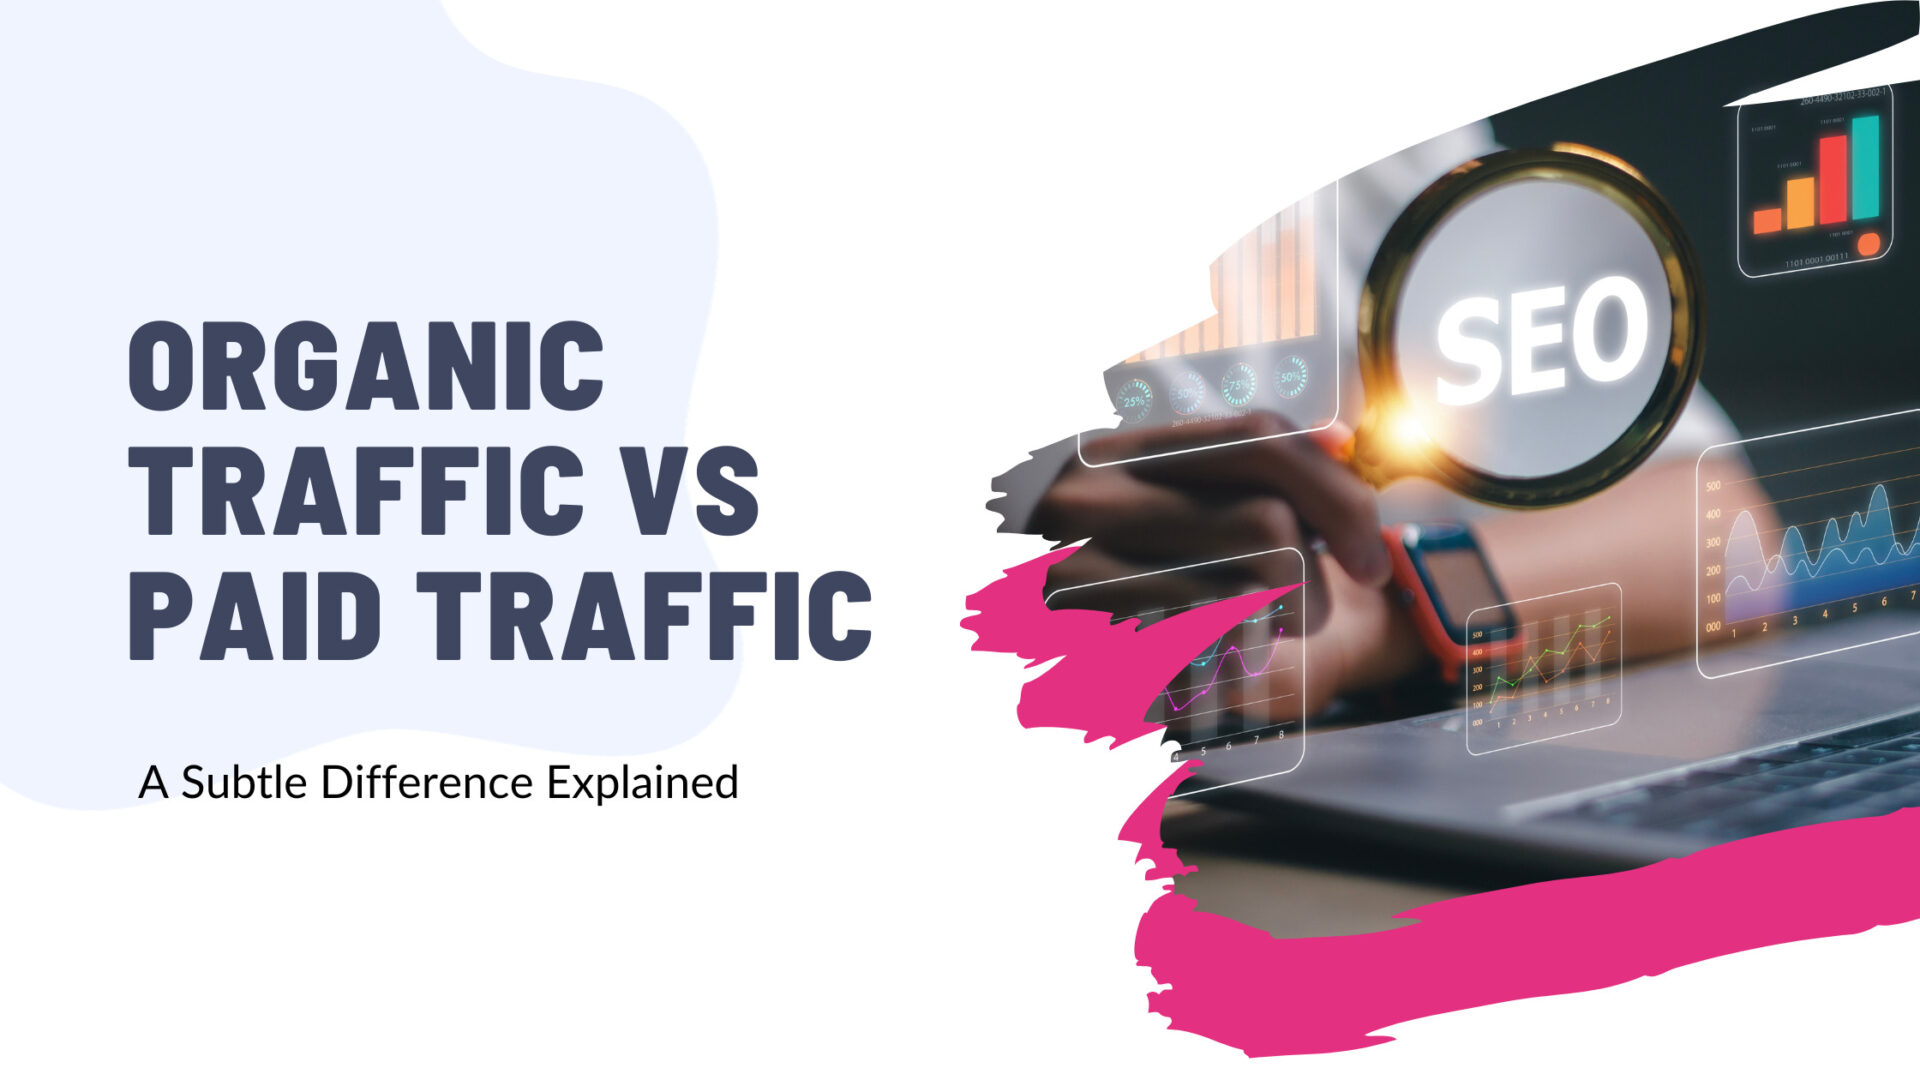 Organic Traffic vs Paid Traffic: A Subtle Difference Explained